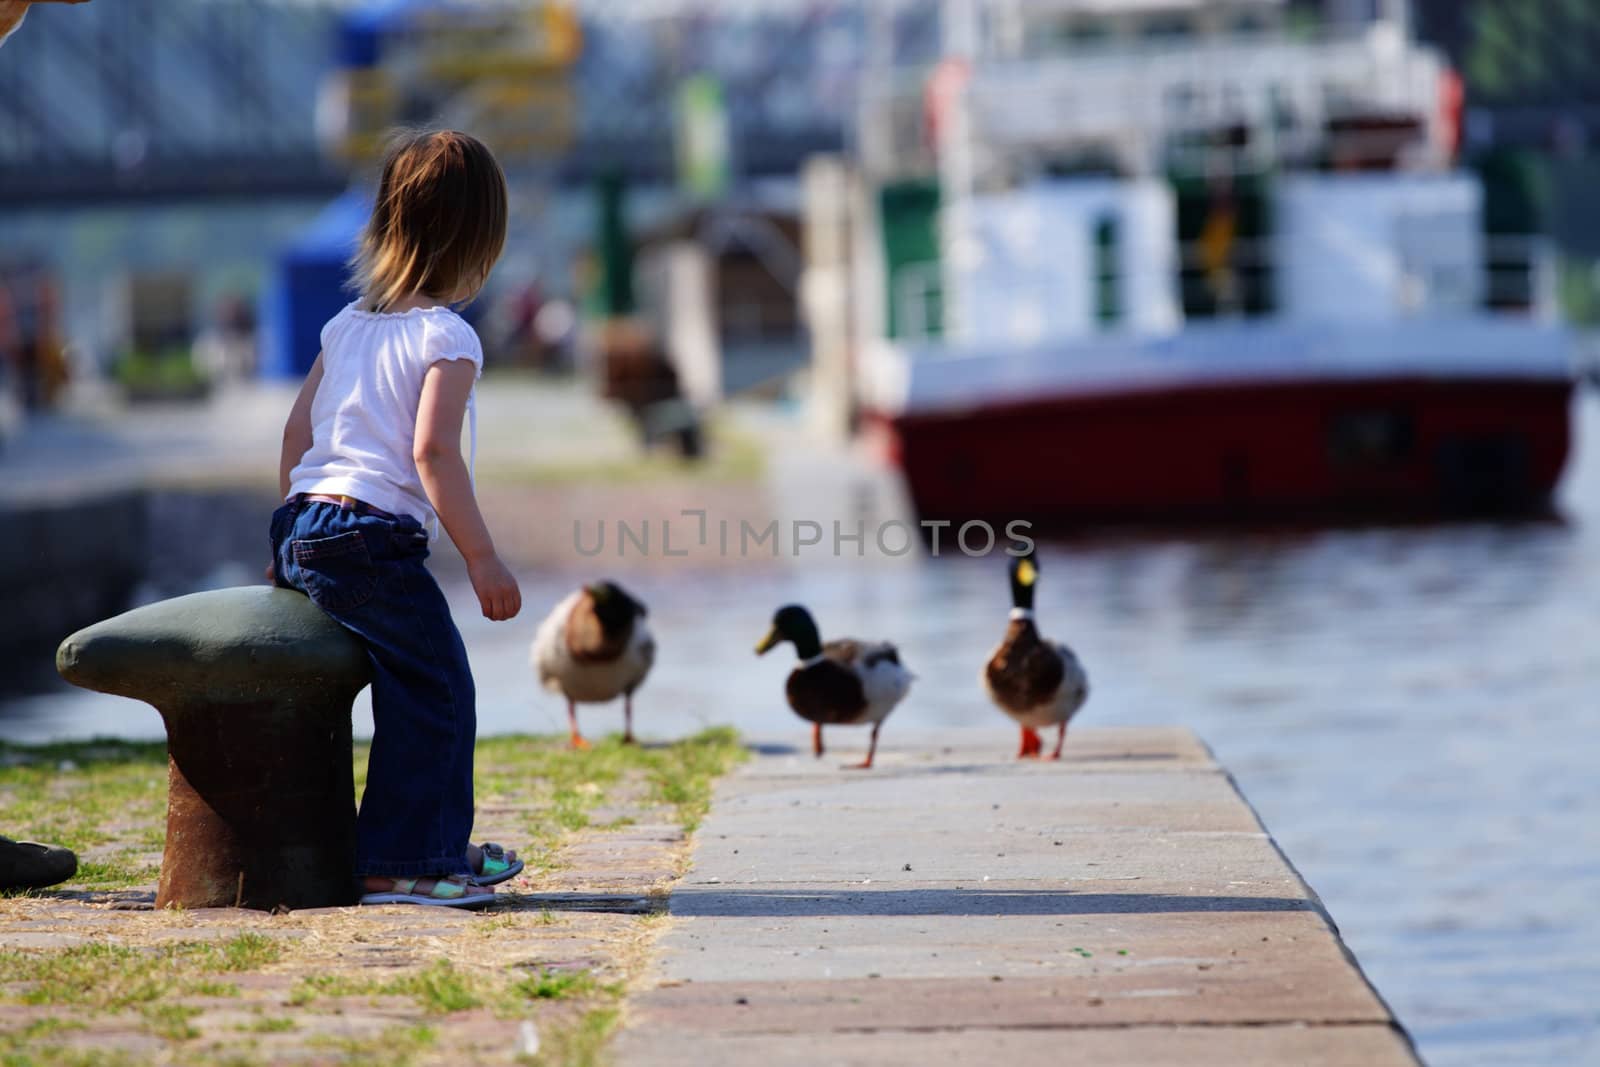 Little beauty girl feedind wild ducks at landing stage or river embankment at sunny day. She is wait for duck. We see ship not in fokus at background. Prague, Vltava.